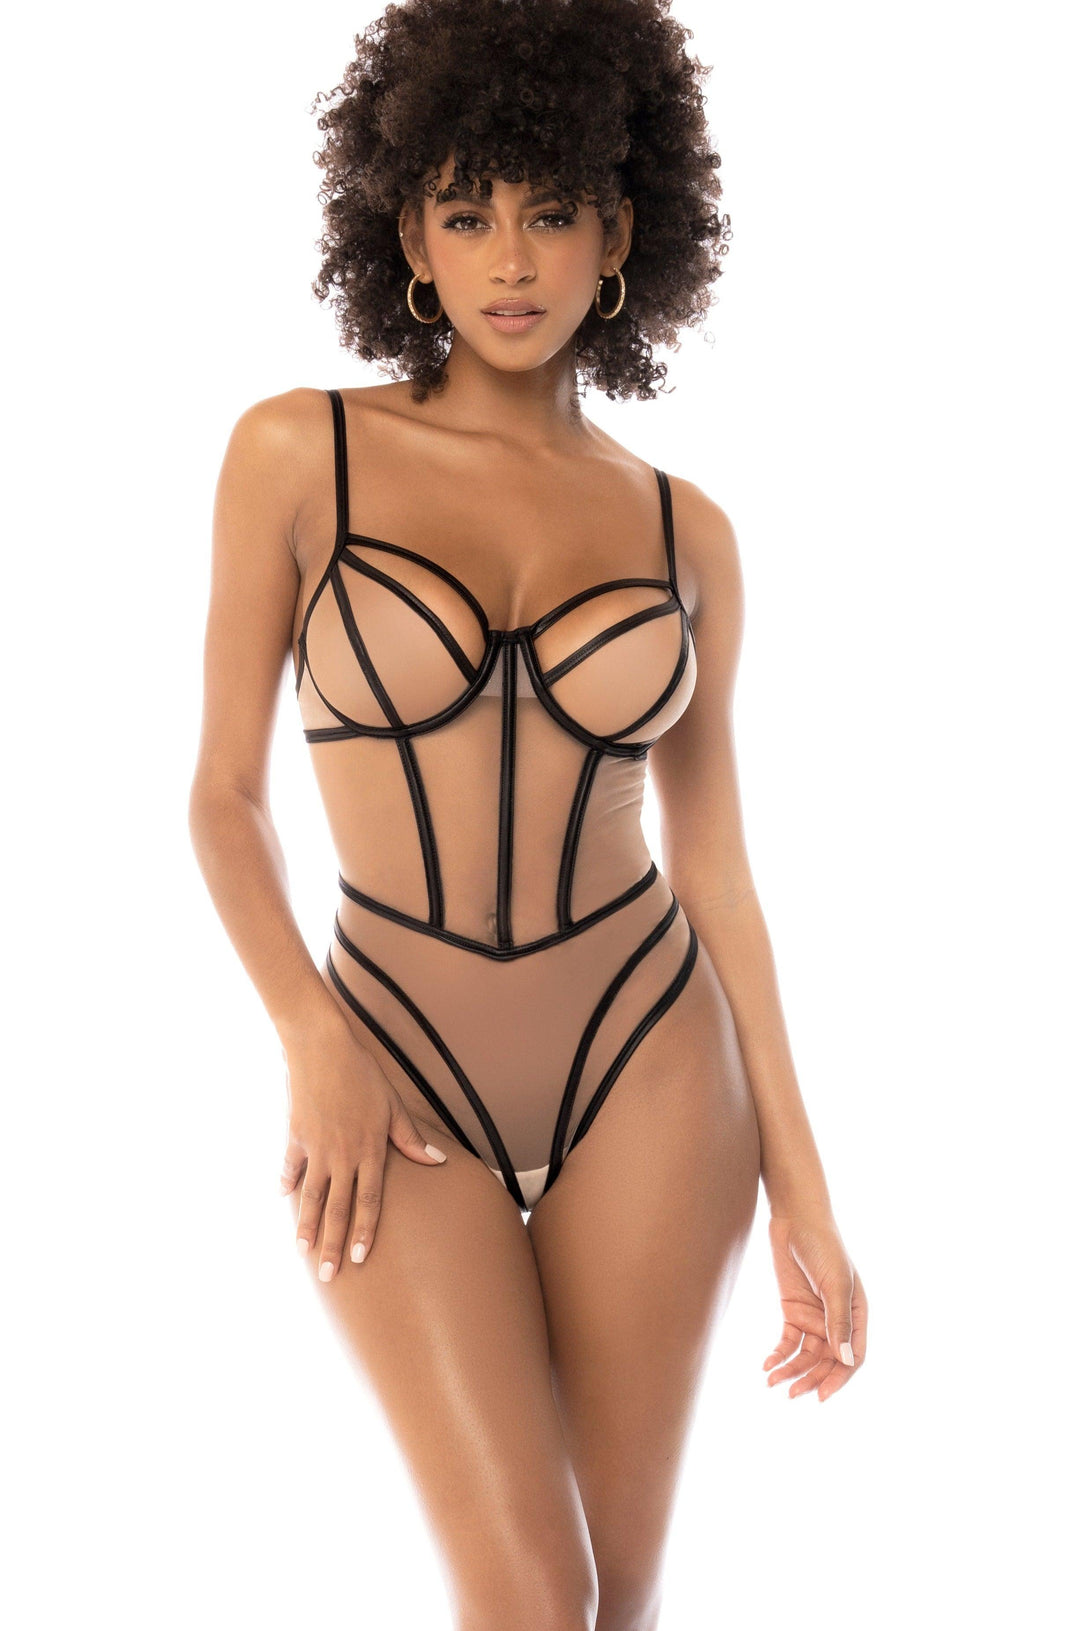 Mesh with Contrasting Linework Underwired Bodysuit - SEXYSHOES.COM